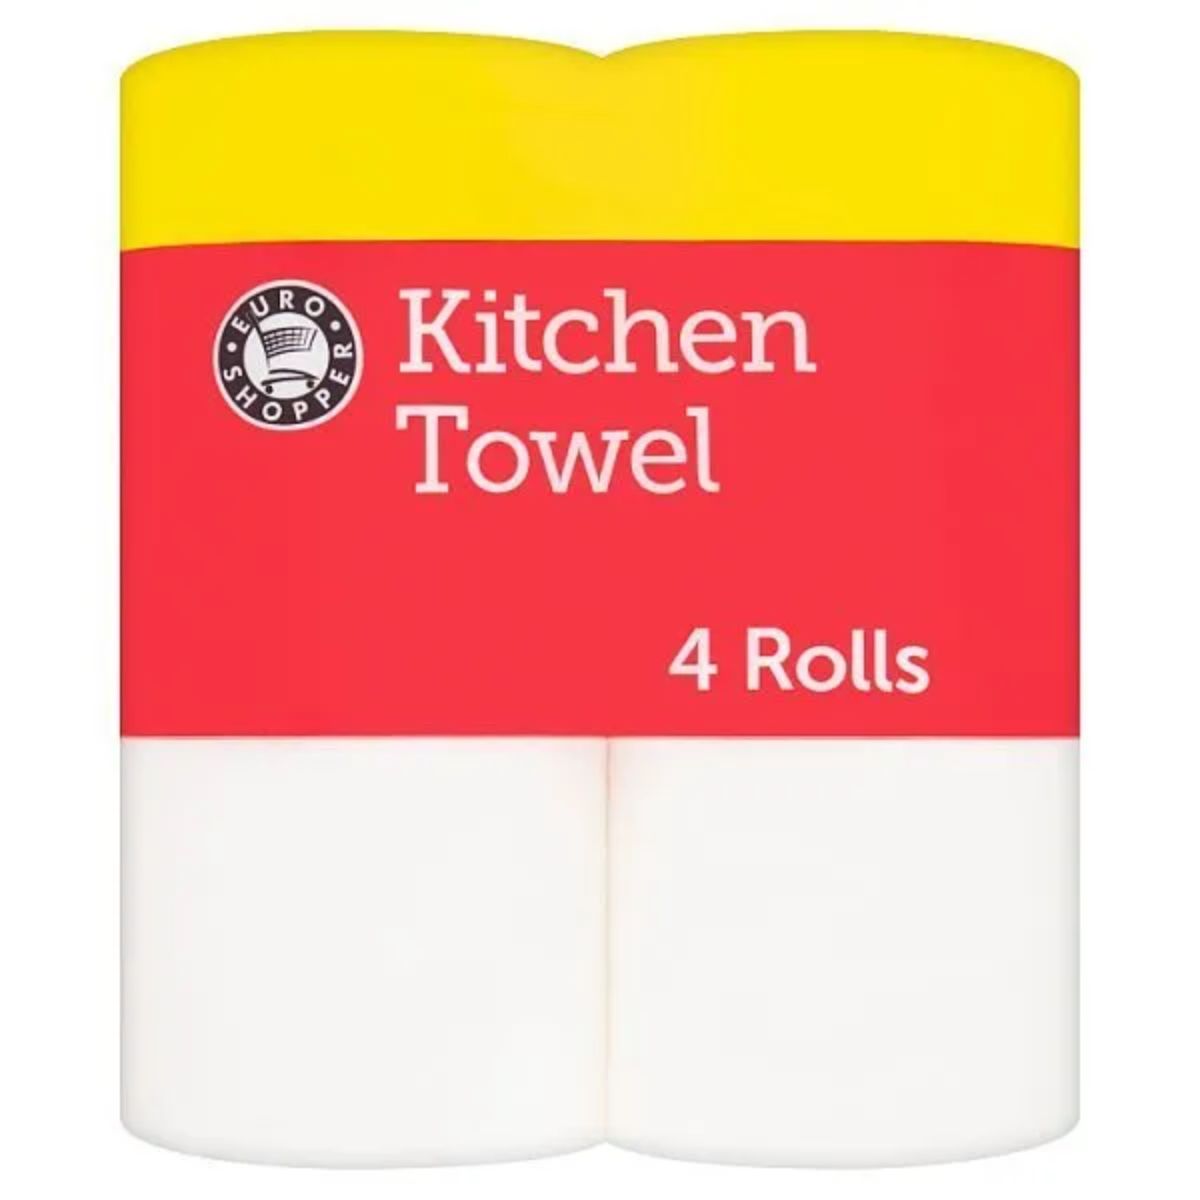 Two Euro Shopper - Kitchen Towel - 4pcs in a yellow and white package.